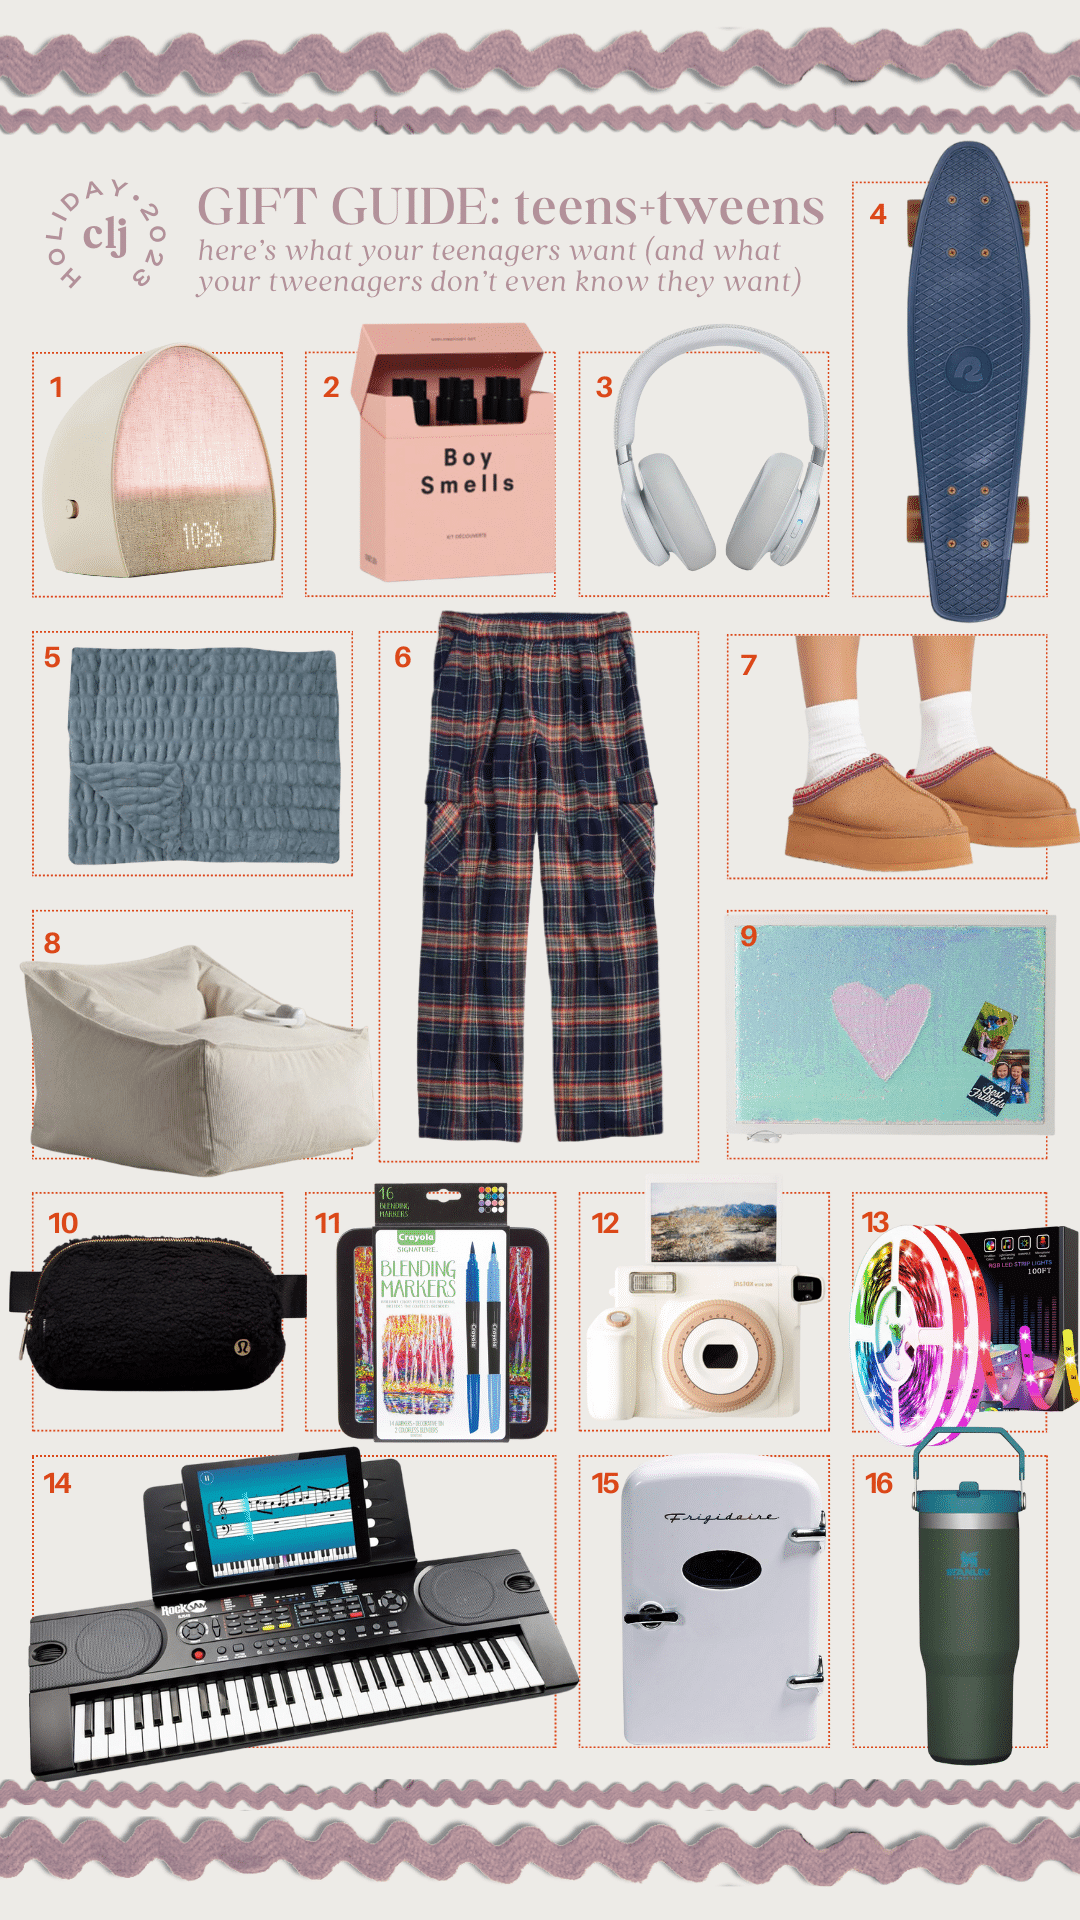 Gift Guide: For Teens and Tweens